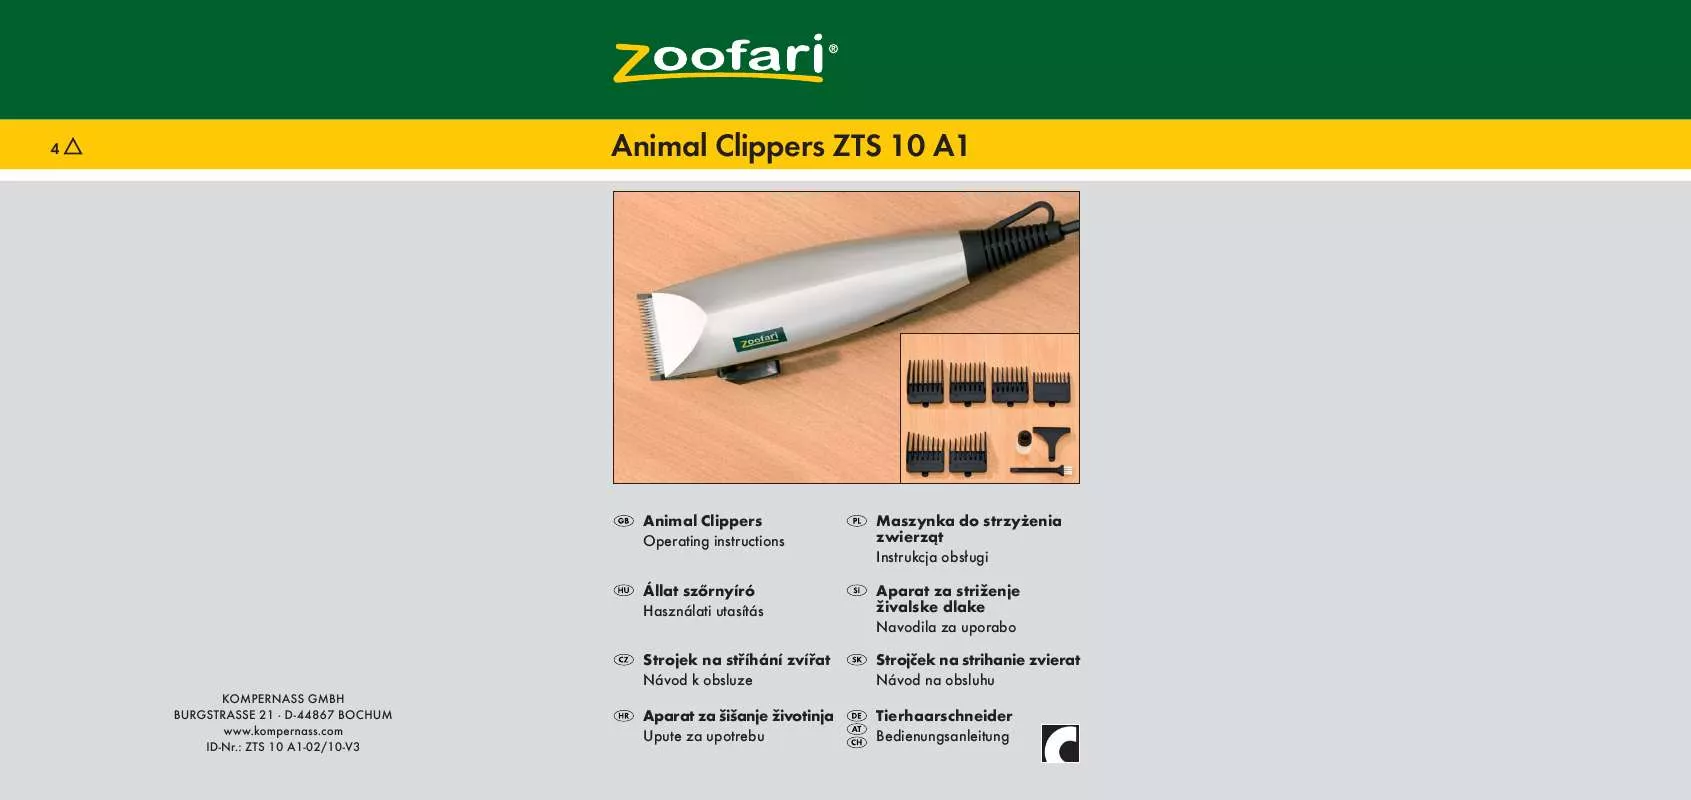 Mode d'emploi ZOOFARI ZTS 10 A1 ANIMAL CLIPPERS